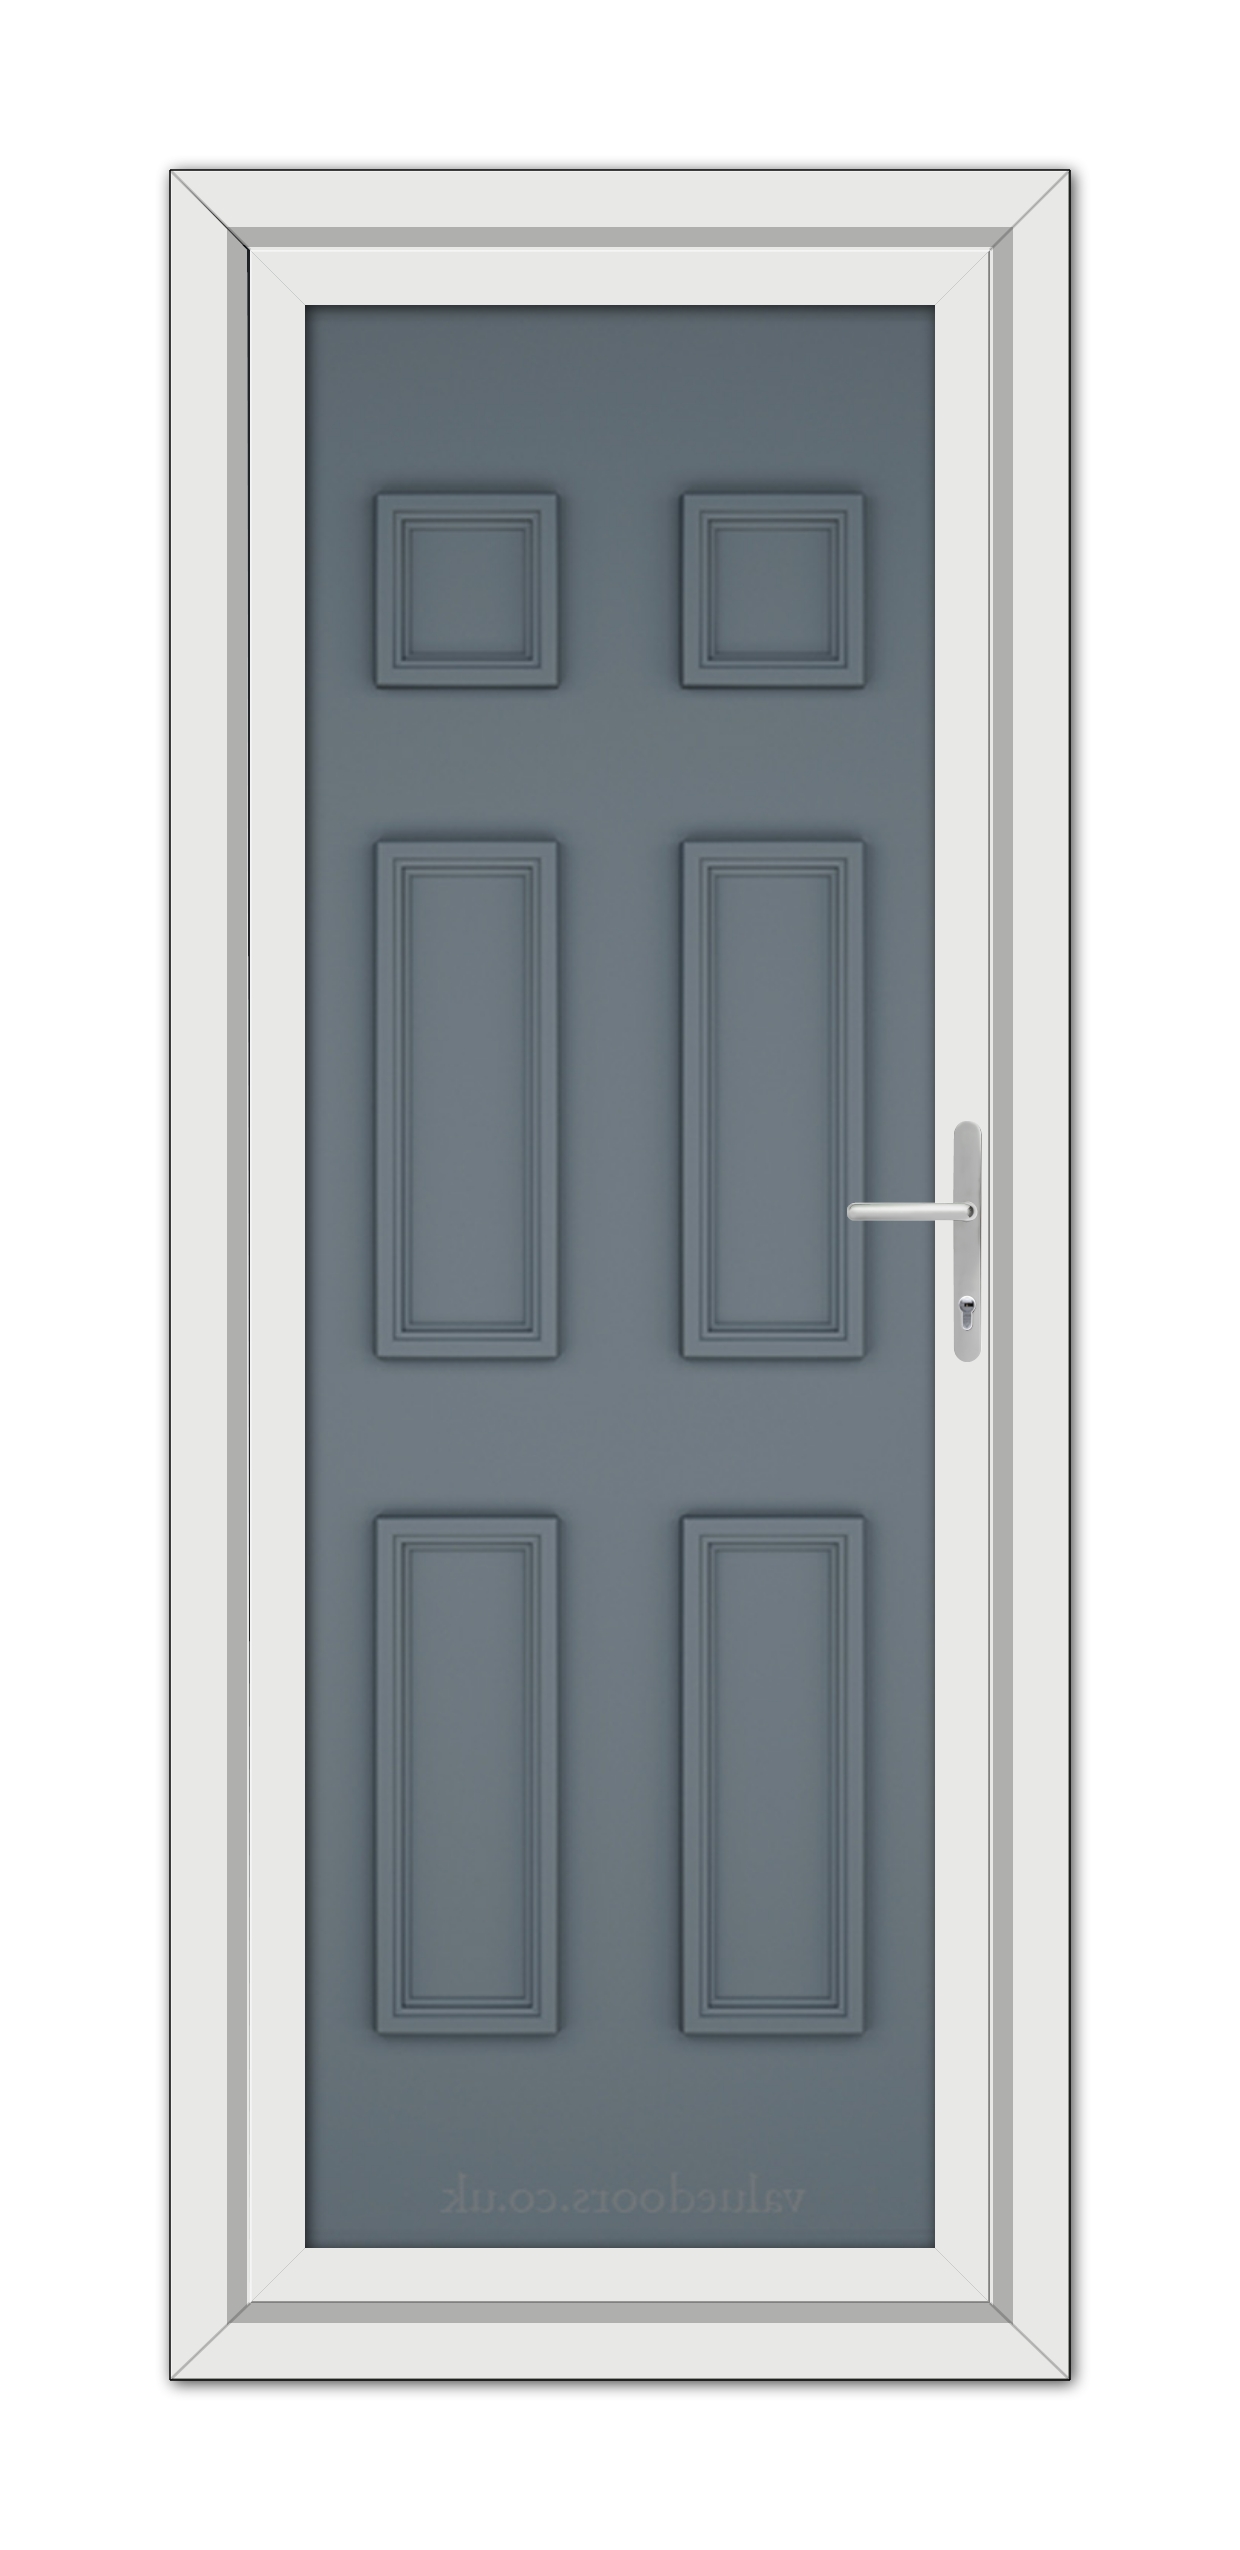 A modern Slate Grey Windsor Solid uPVC Door with six rectangular panels and a silver handle, set within a white door frame.